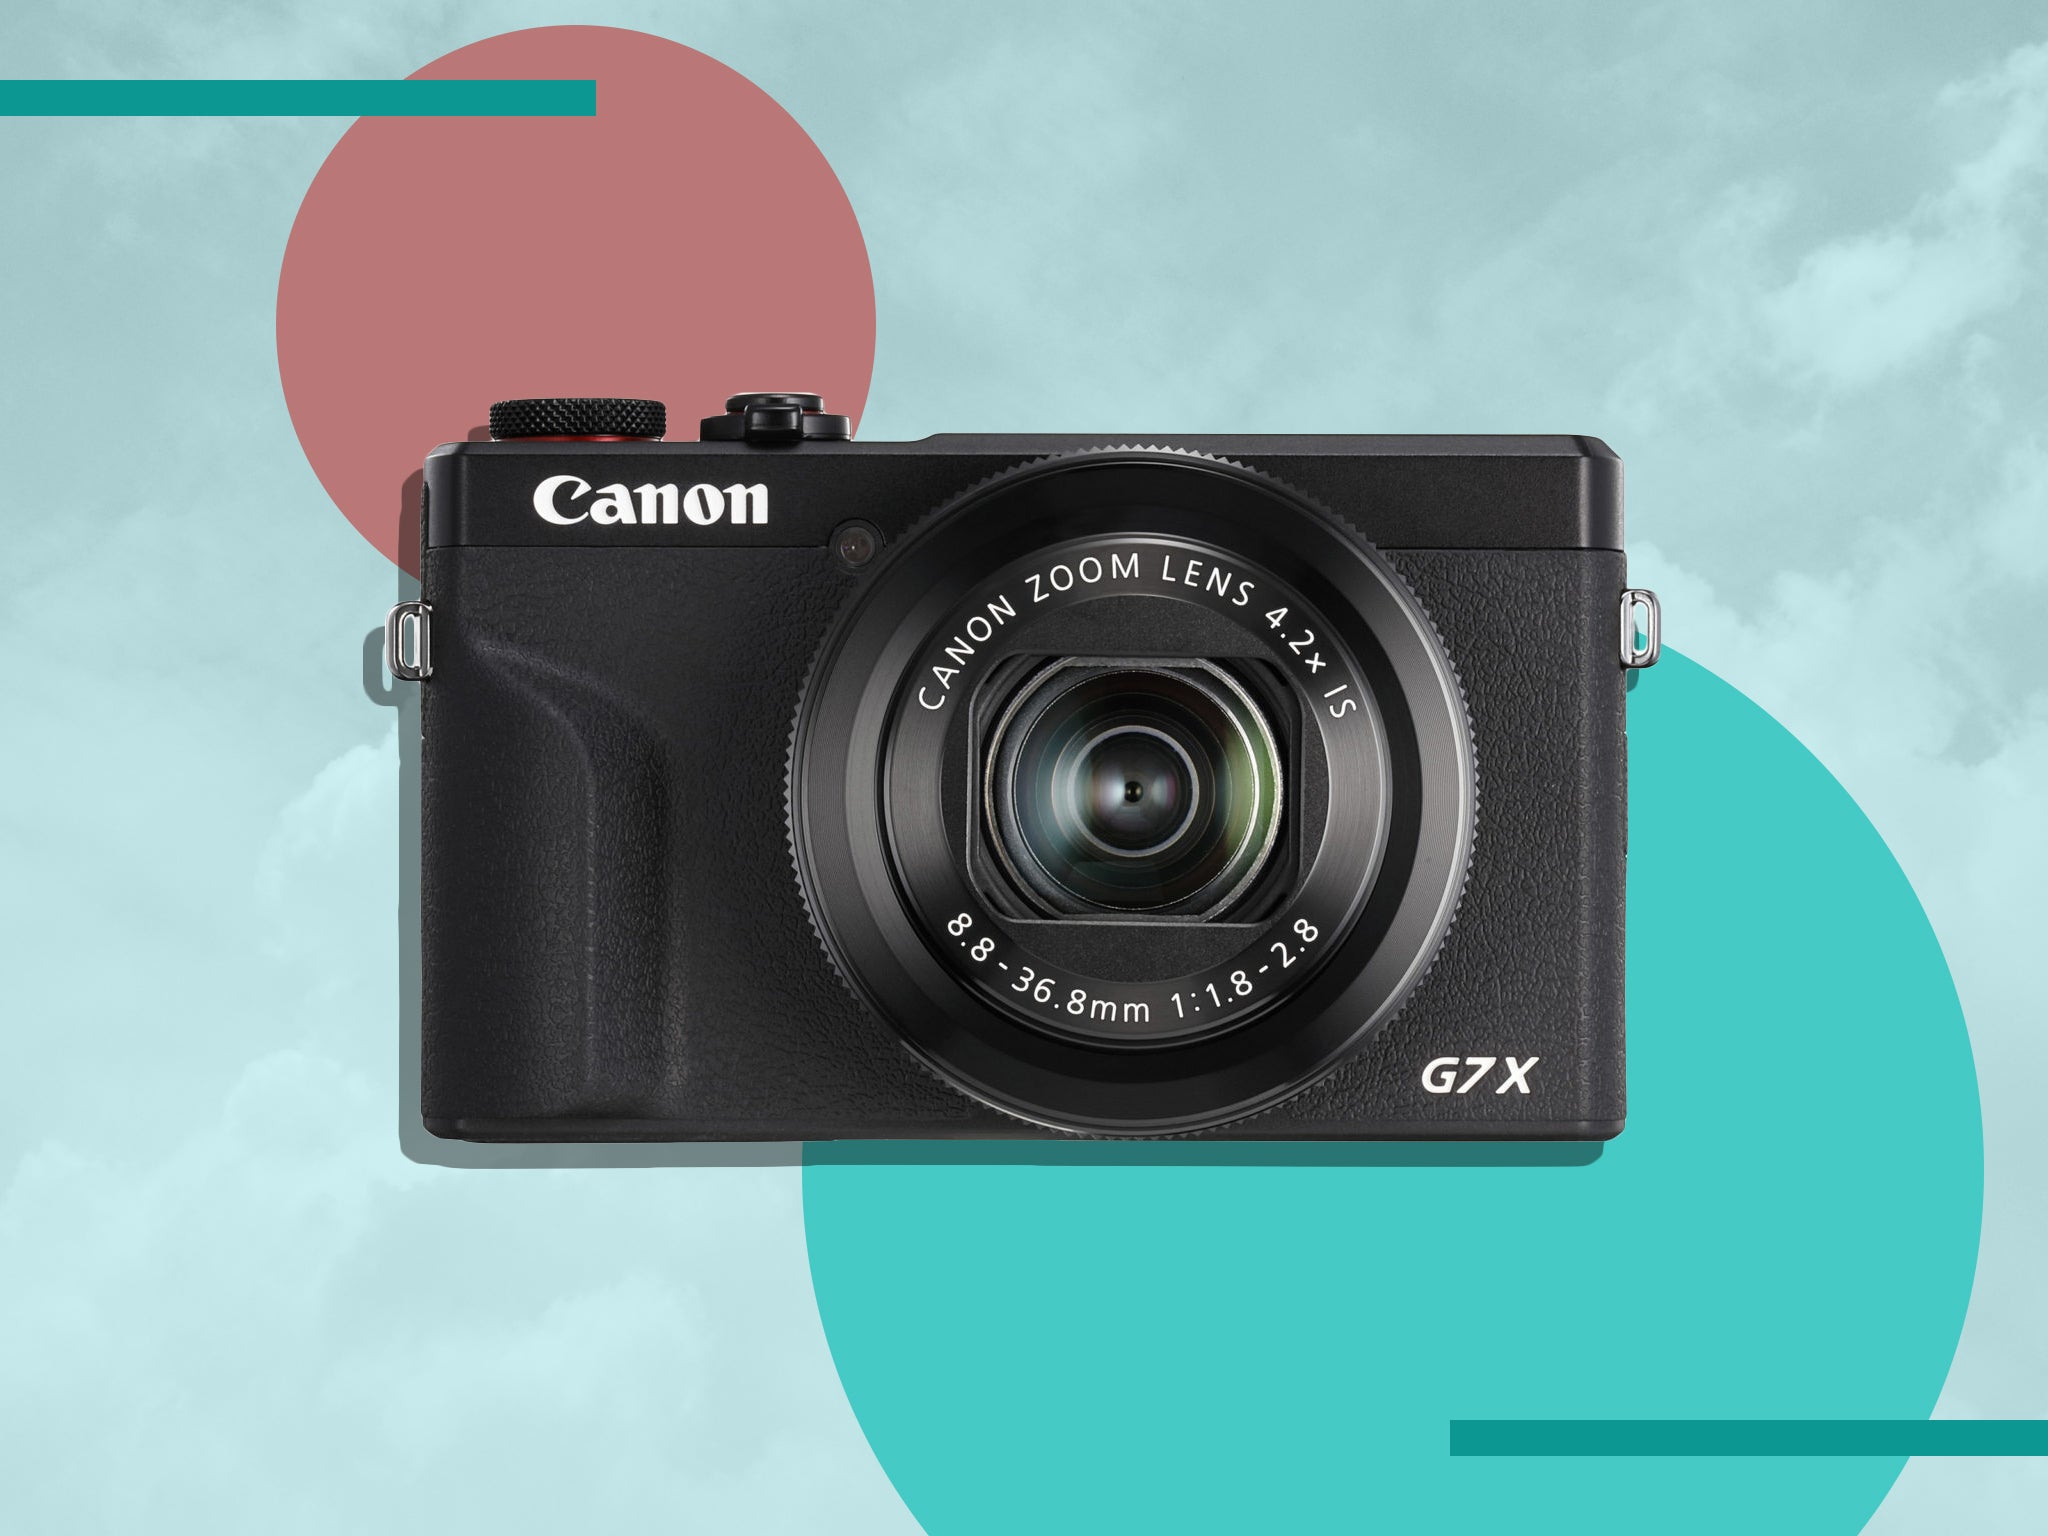 Canon powershot G7 X Mark III review: A lightweight camera for vloggers